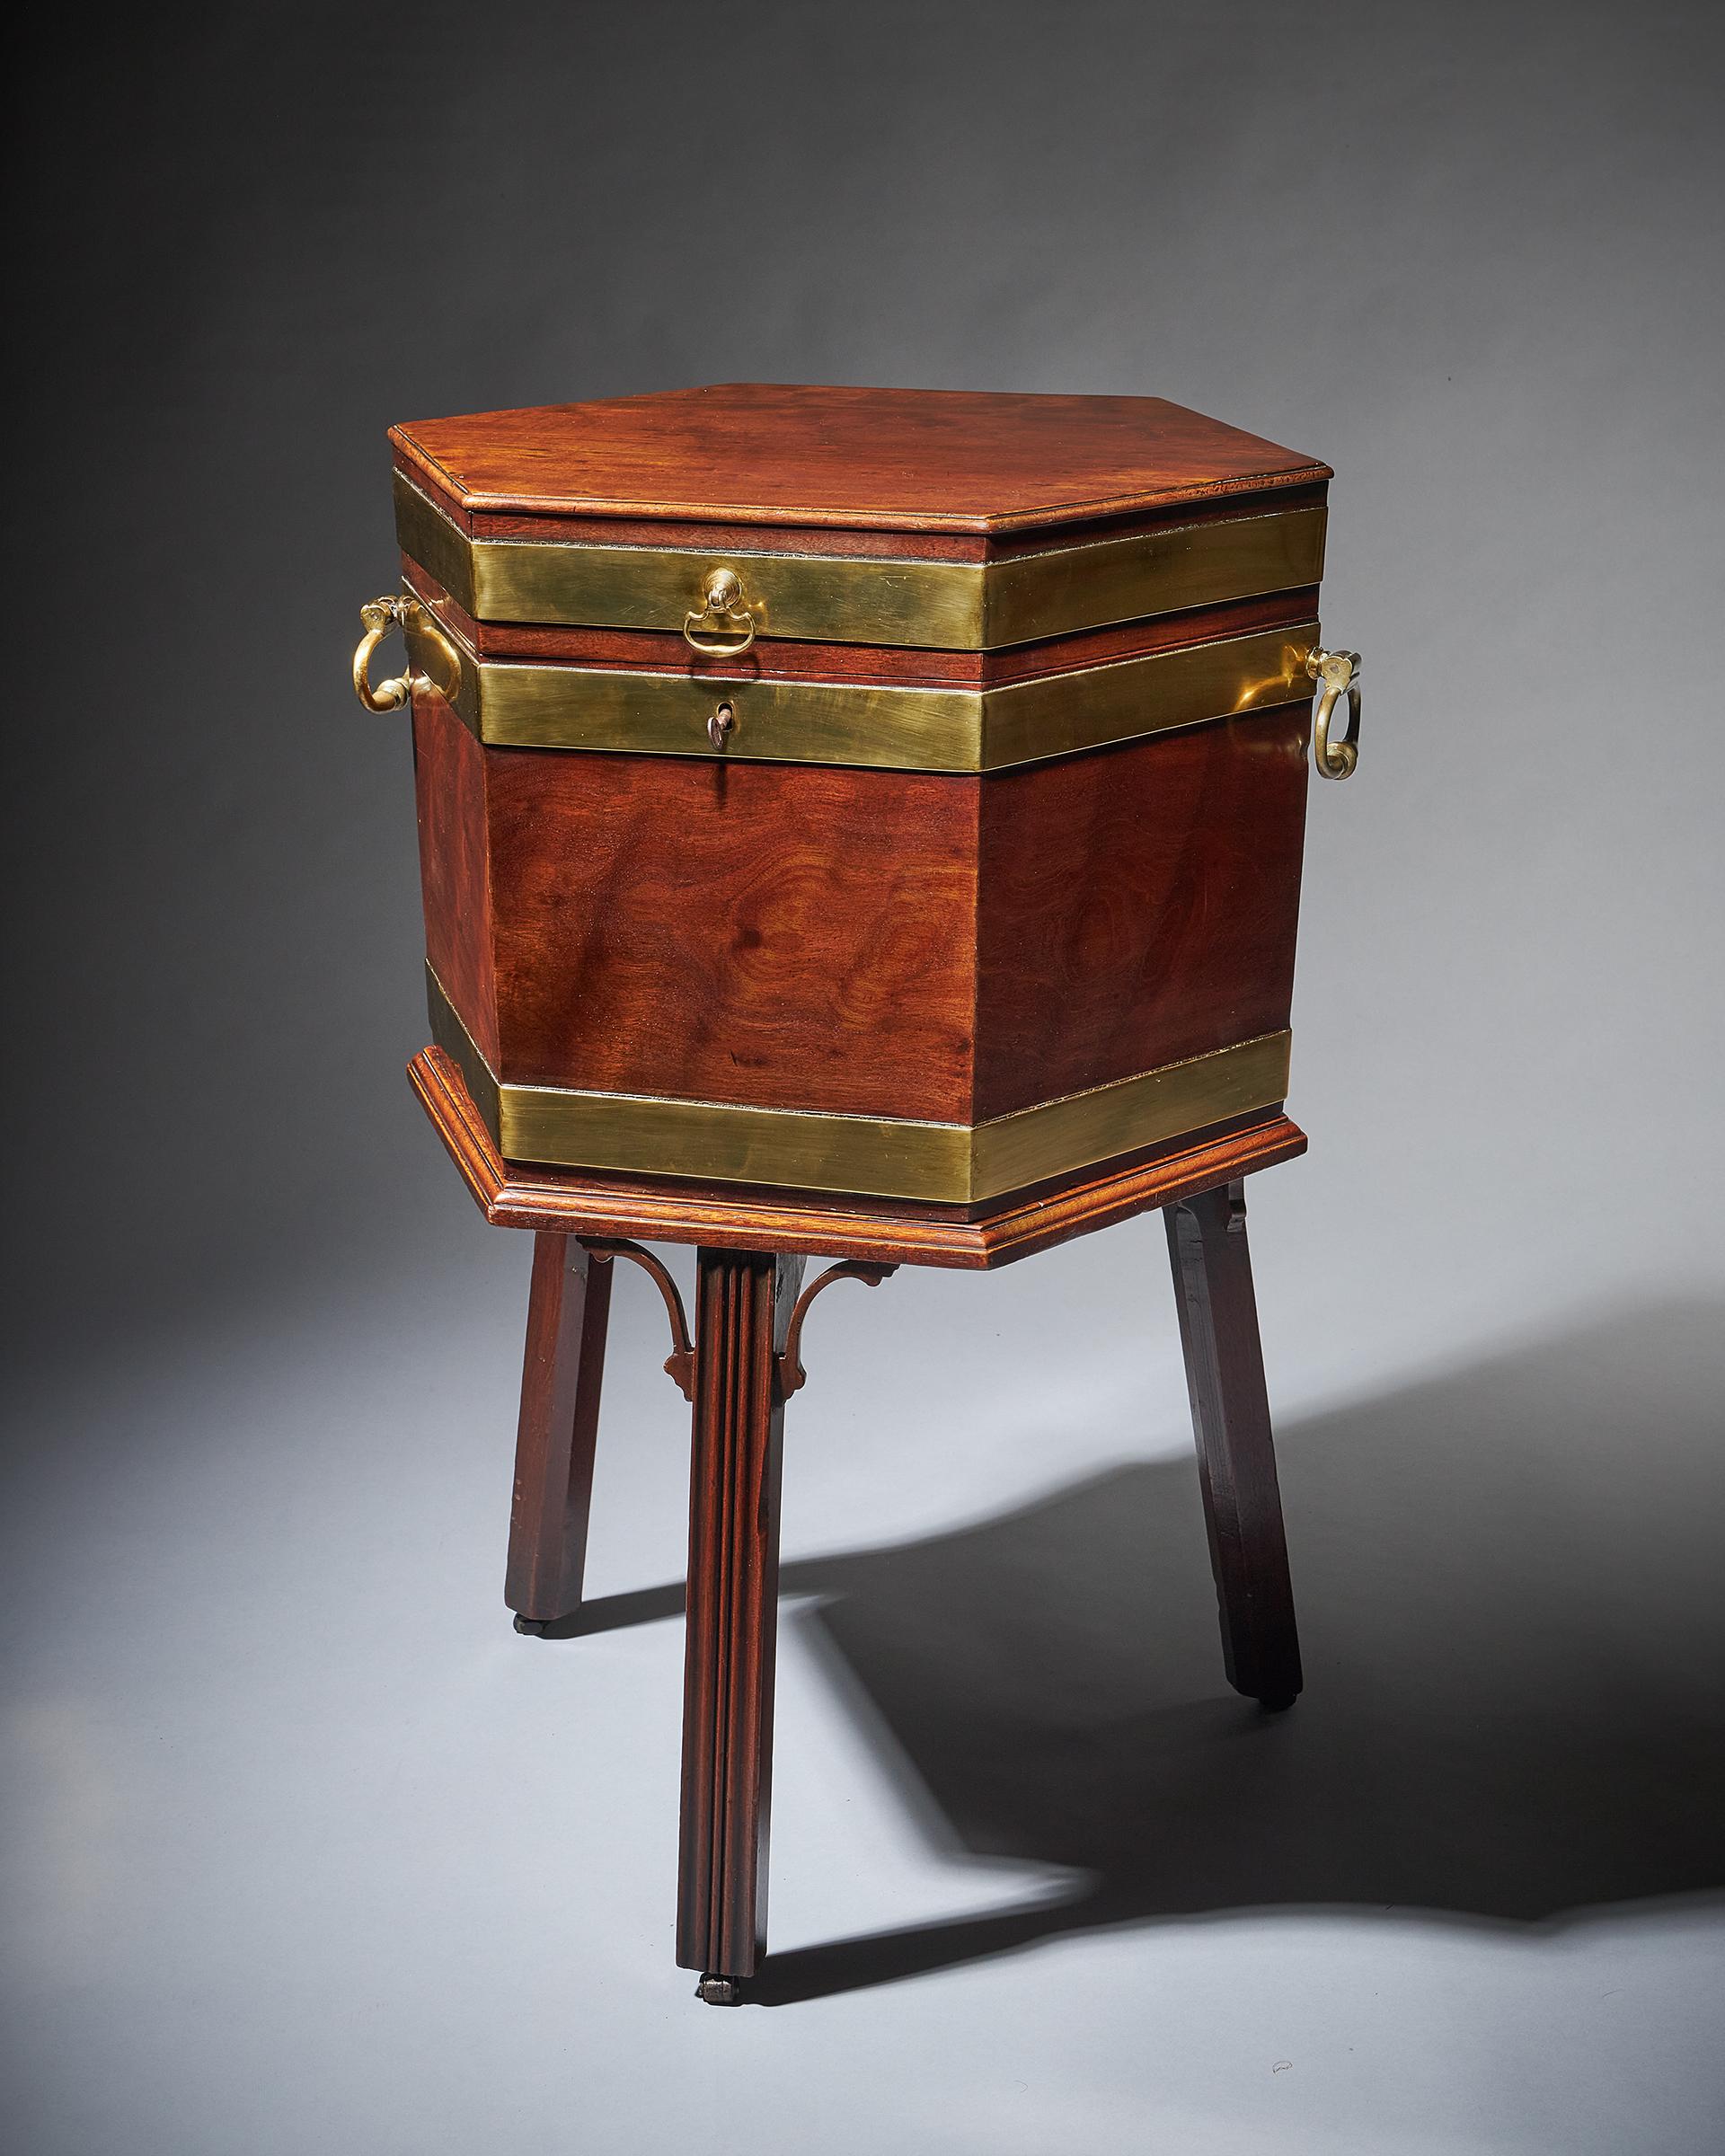 A fine and well-figured George III mahogany hexagonal wine cooler or cellarette on the original stand, C. 1770 England. In the manner of Thomas Chippendale.

There is always something charming about this sort of cellarette and its hexagonal shape